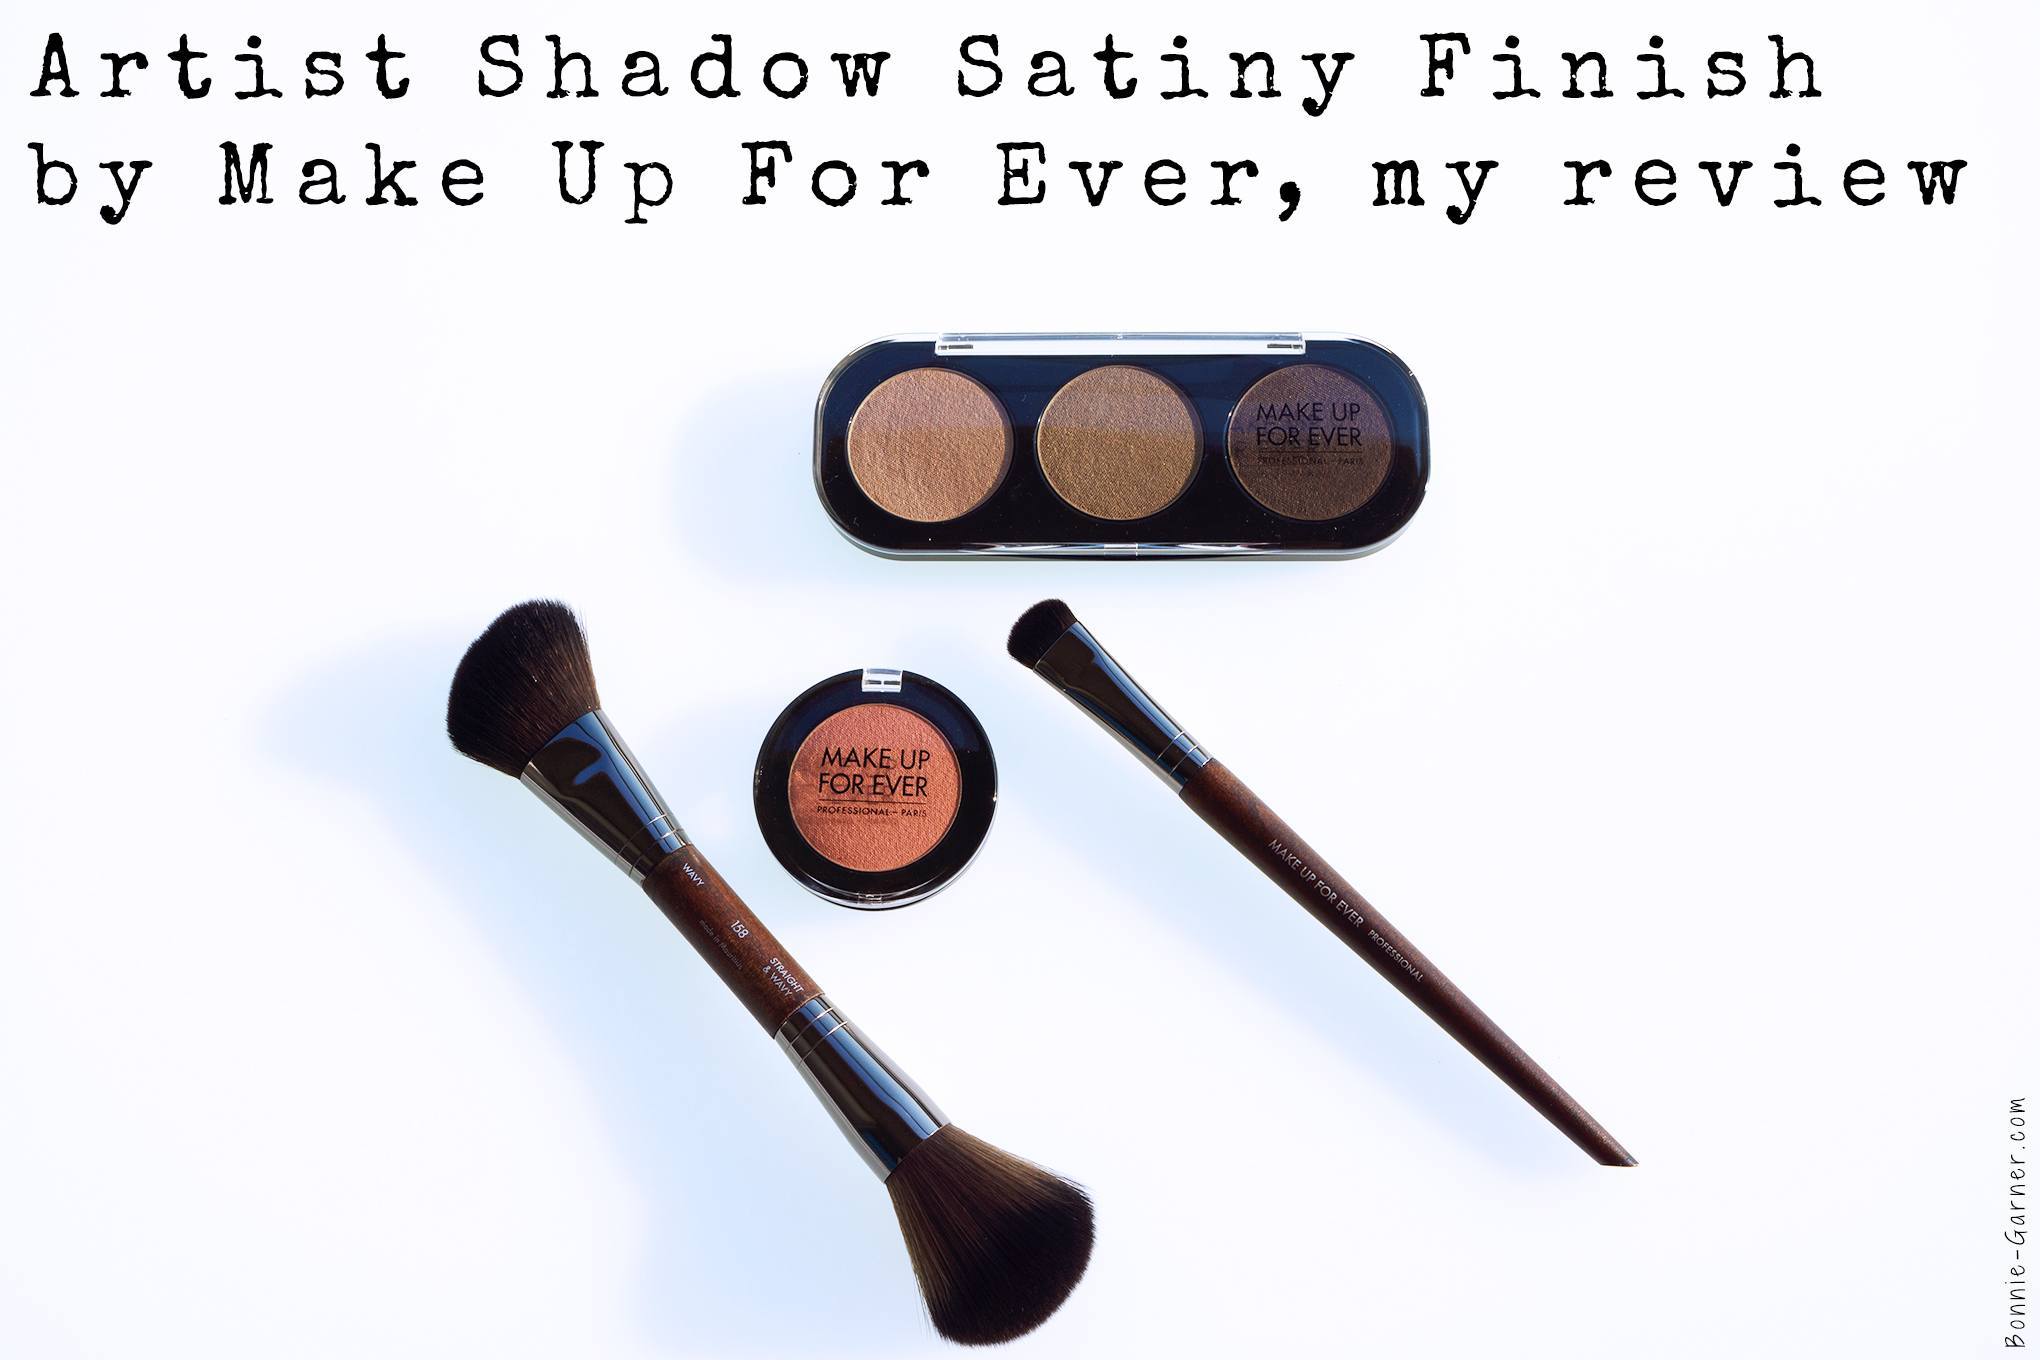 Artist Shadow Satiny Finish by Make Up For Ever, my review